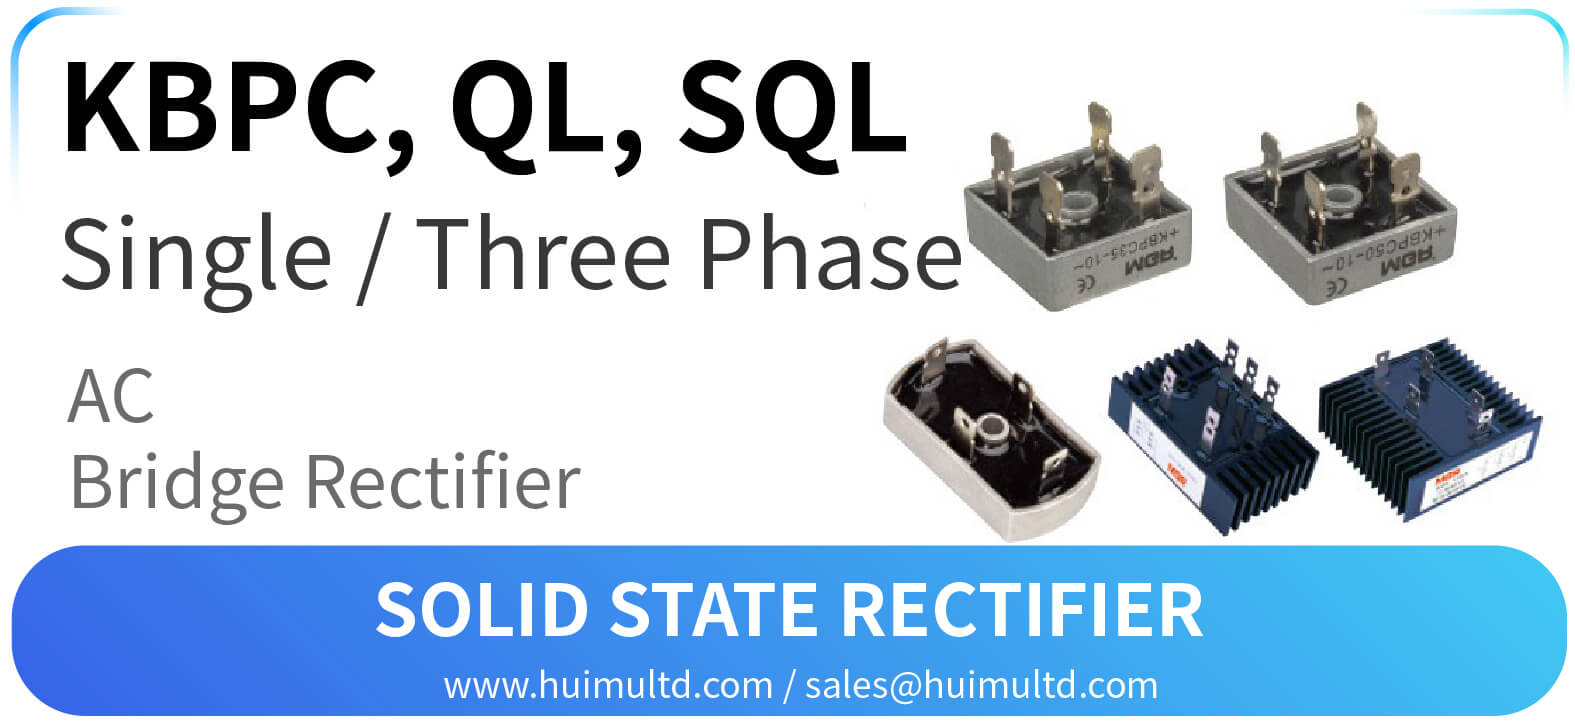 KBPC, QL, SQL Series Solid State Rectifier